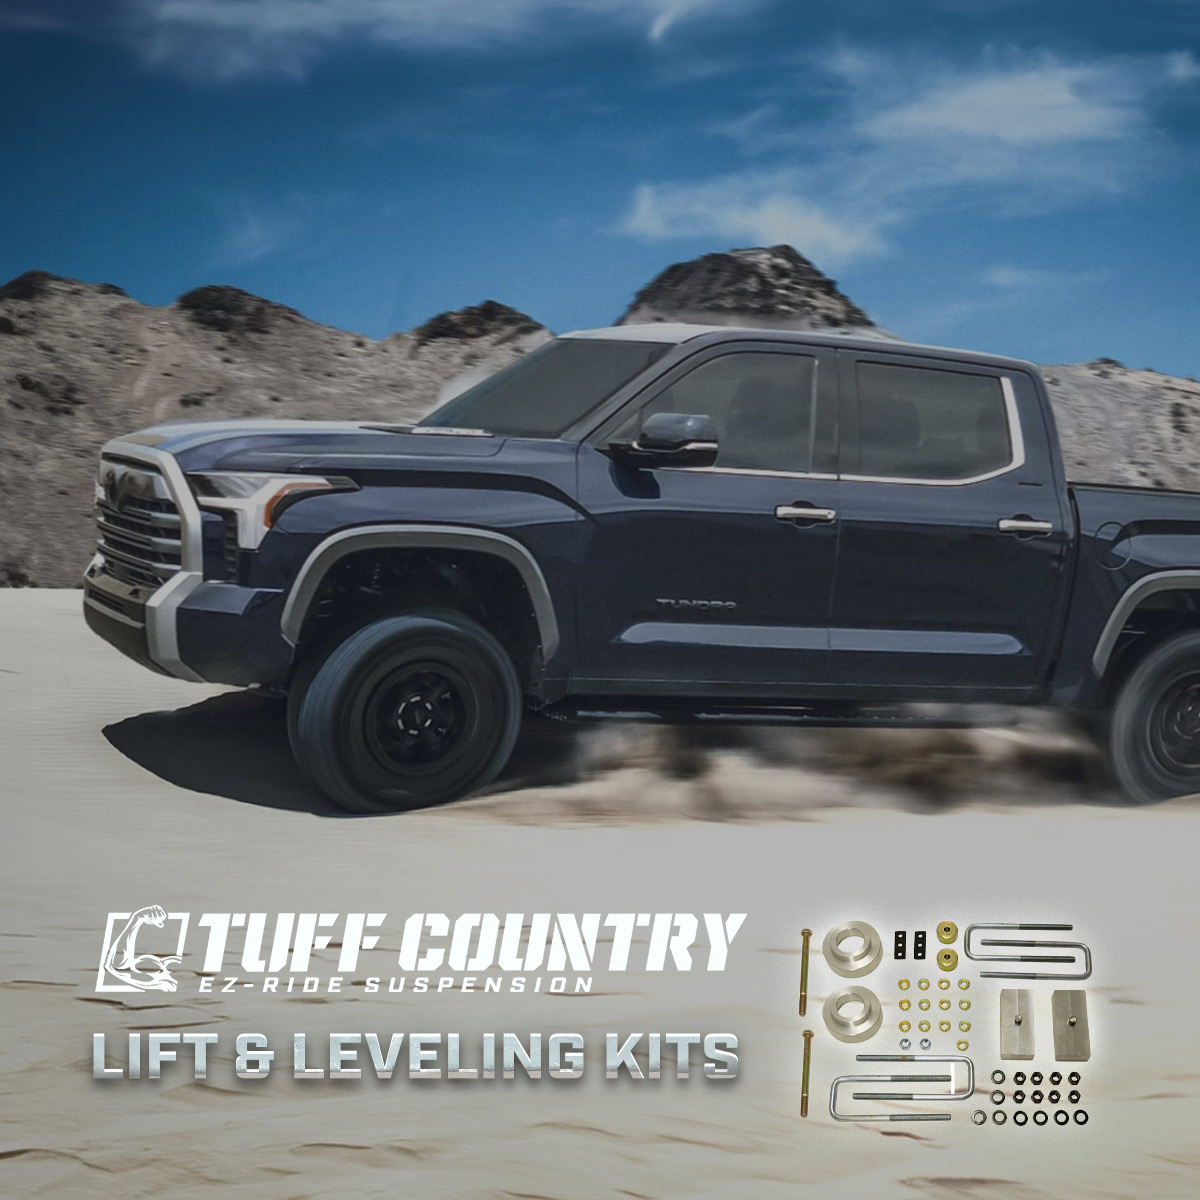 Tuff Country Lift and Leveling Kits